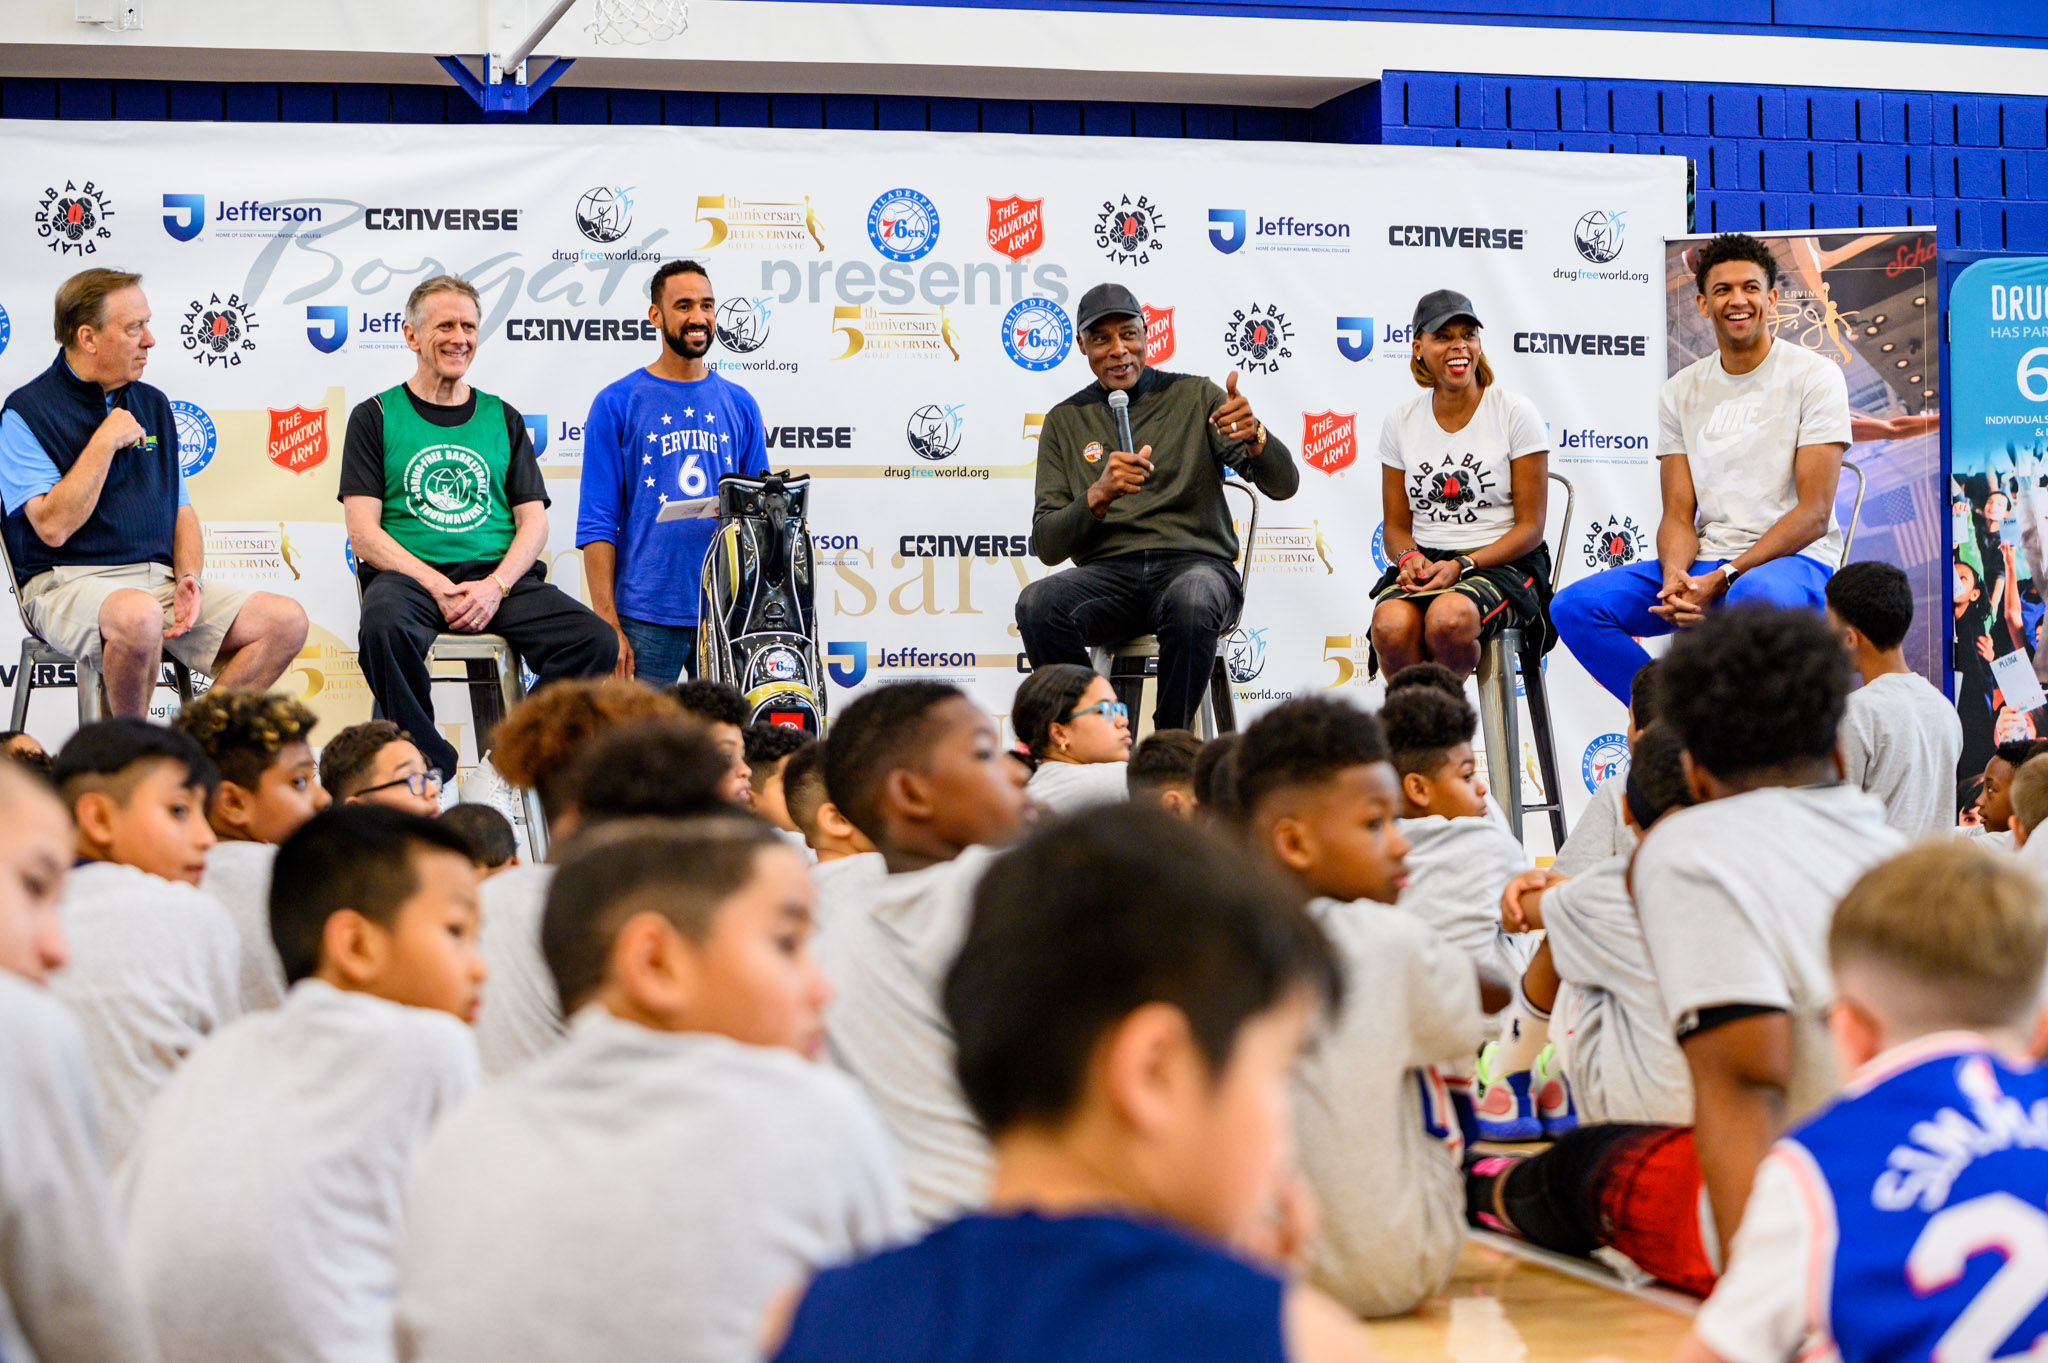 Youth participants of The Erving Clinic presented by The 76ers, Toyota and Jefferson enjoyed a special day at the Sixers Practice Facility on September 7